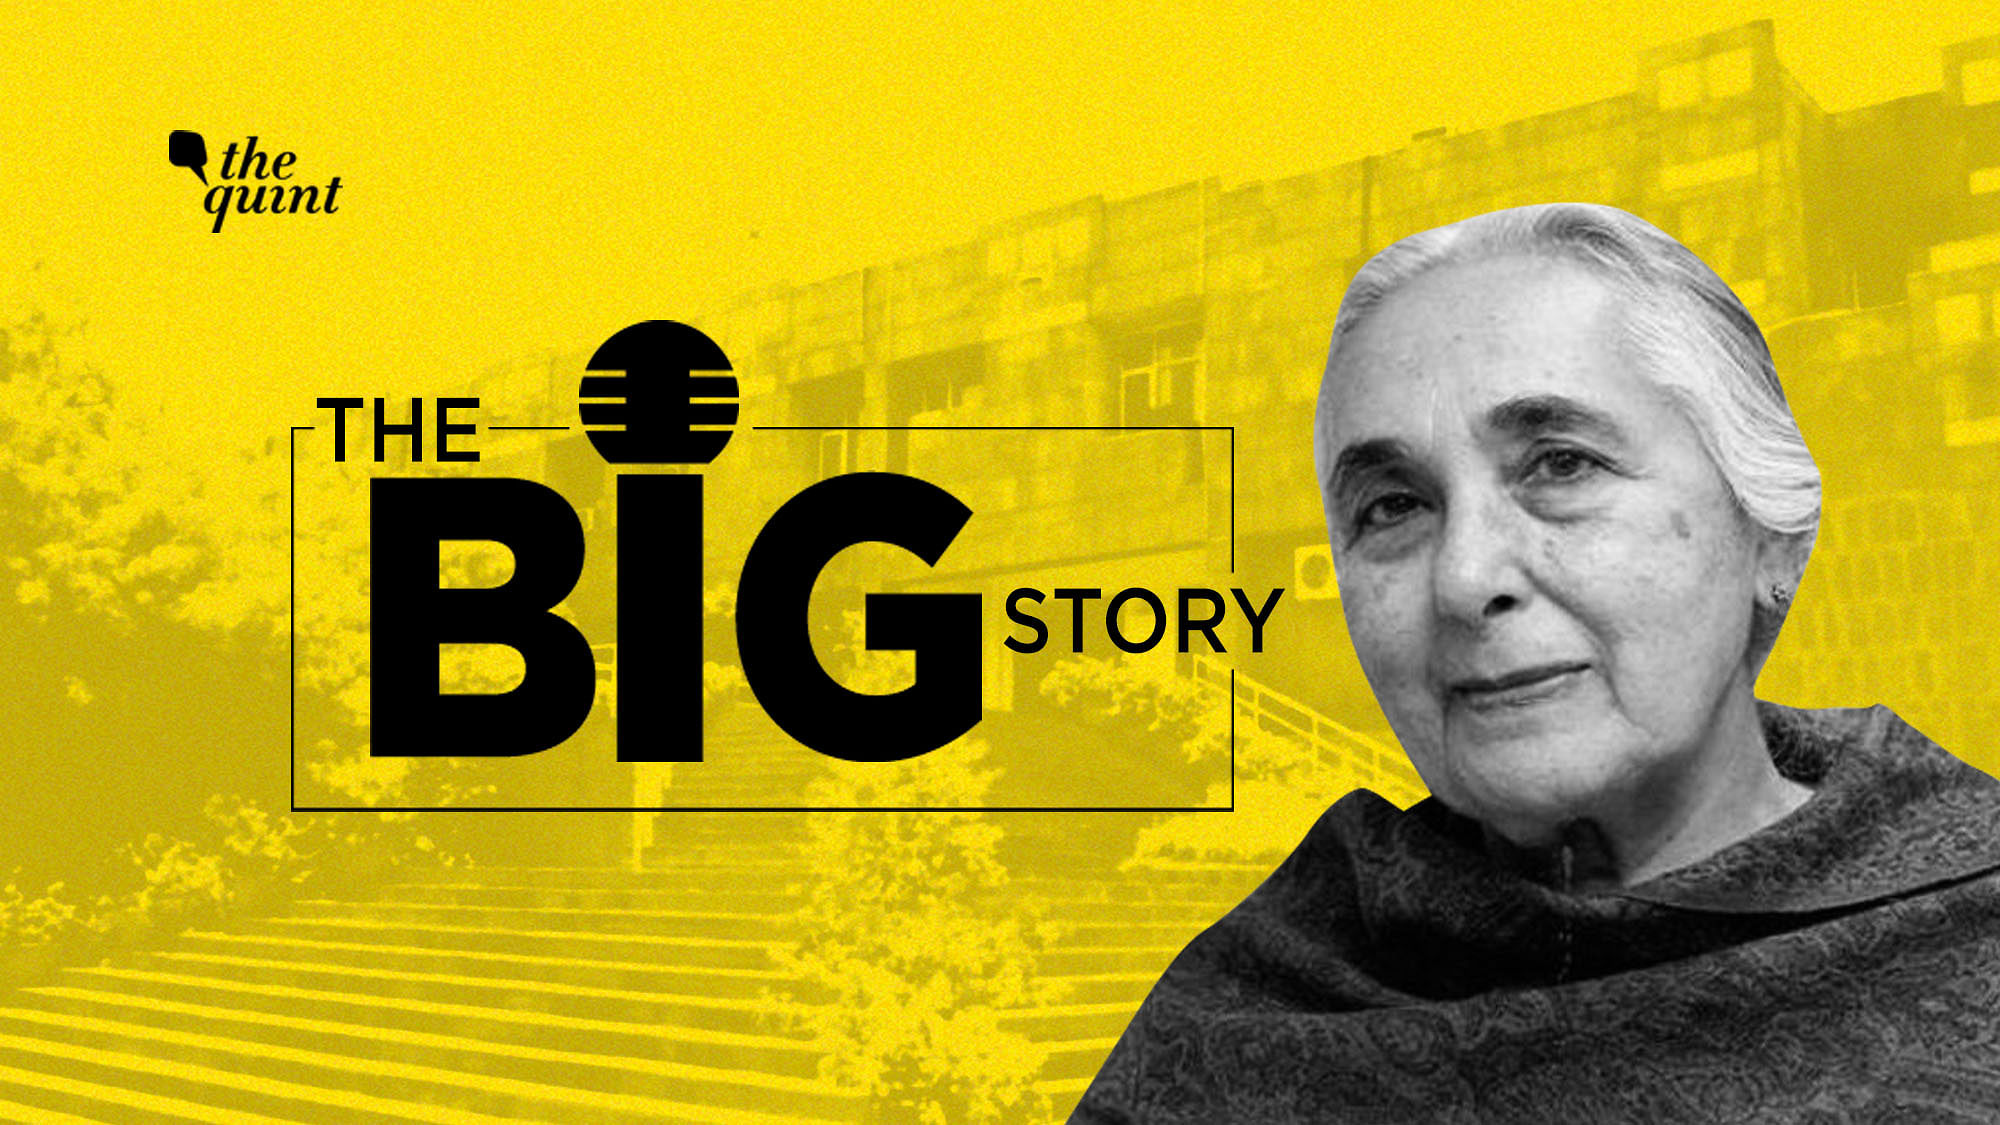 Tune in to The Big Story Podcast to know what are the JNU guidelines that raked up a controversy asking historian Romila Thapar to show her CV.&nbsp;